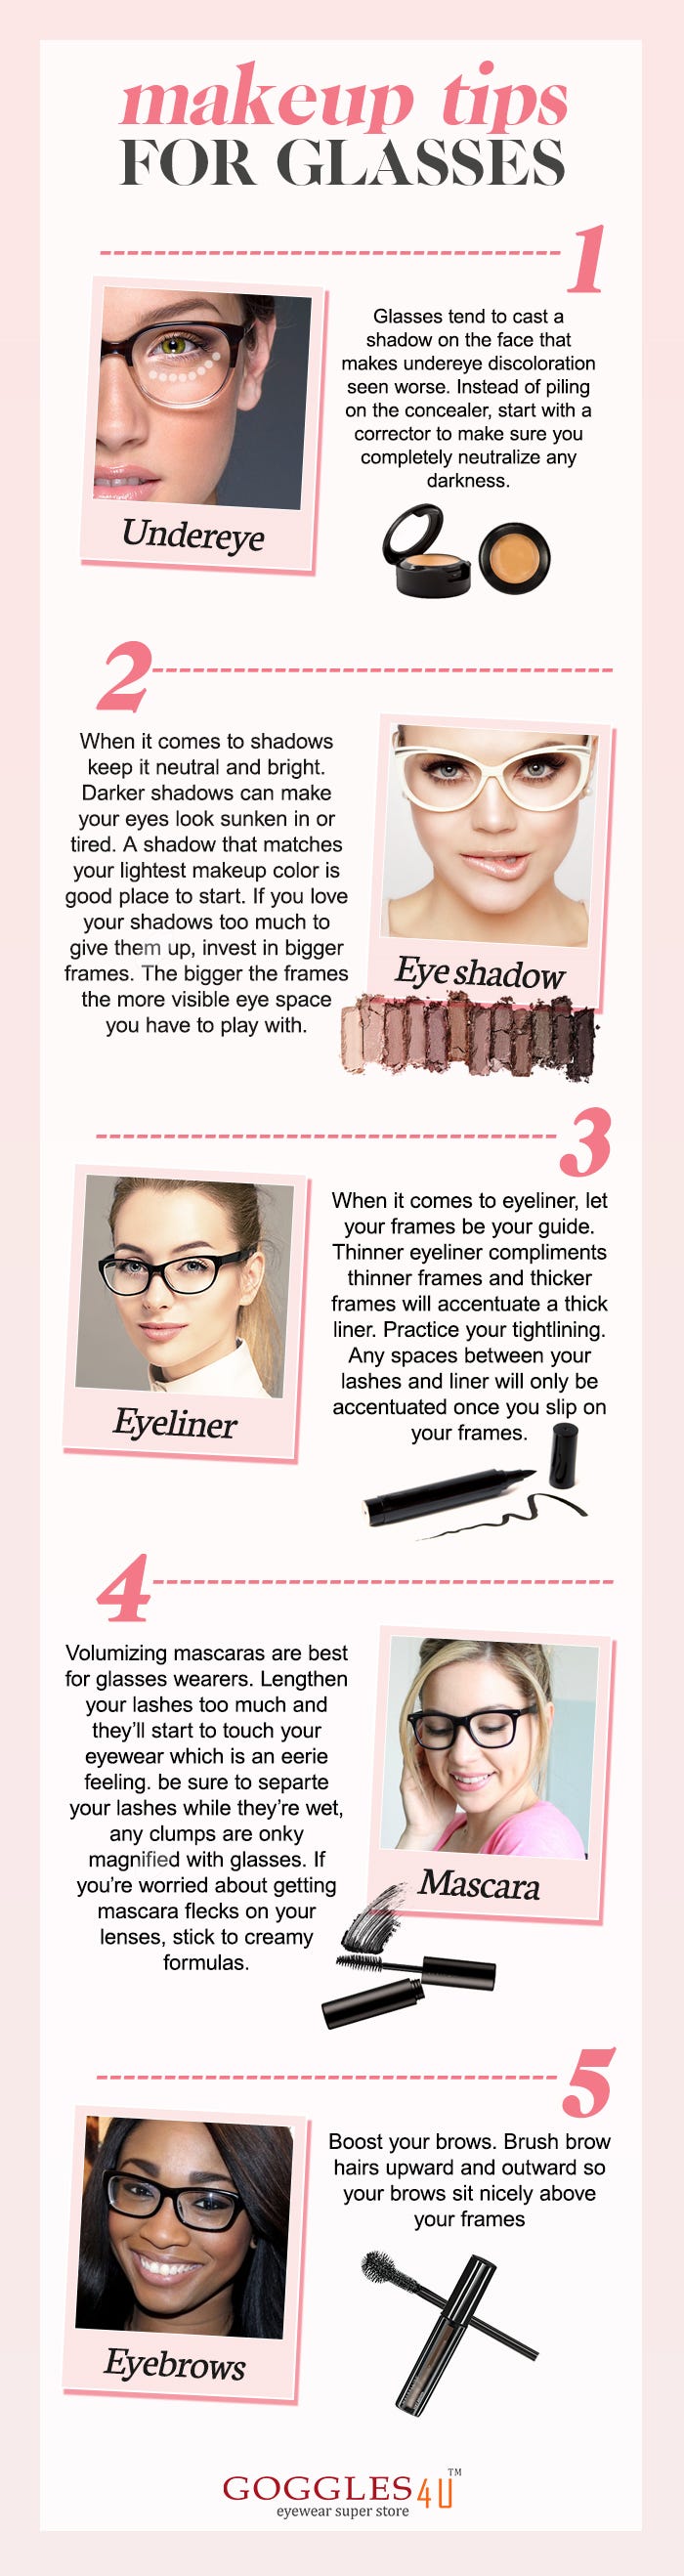 Makeup Tips For Girls Wearing Glasses